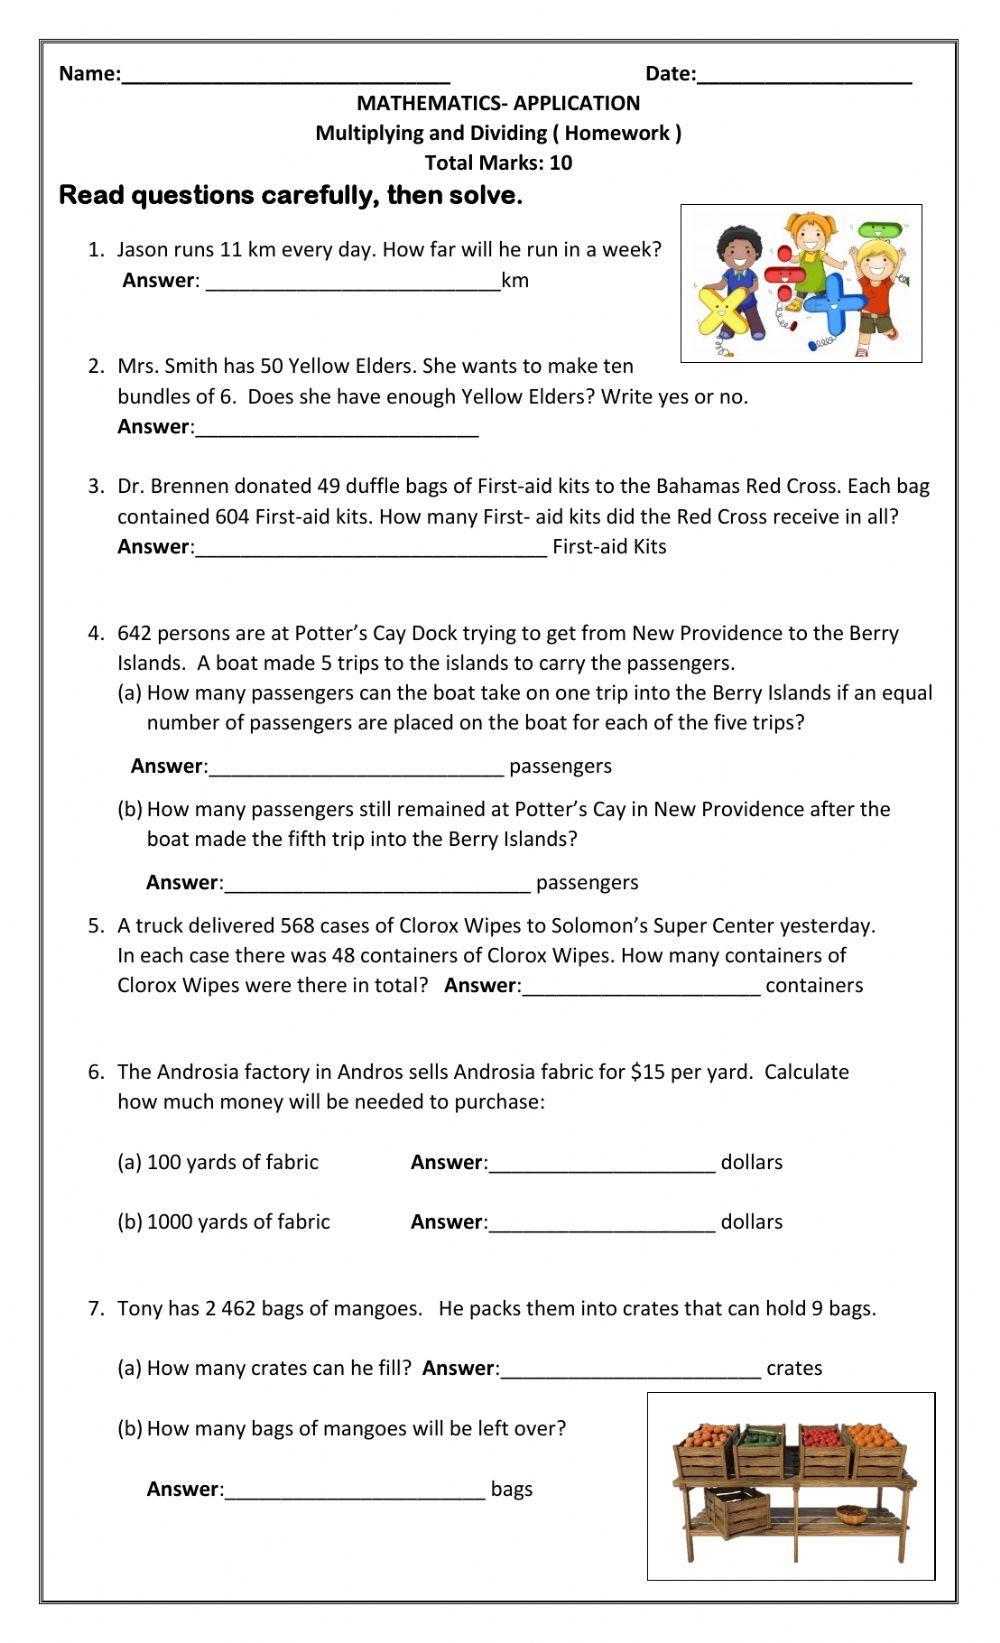 multiplication-and-division-word-problems-interactive-worksheet-live